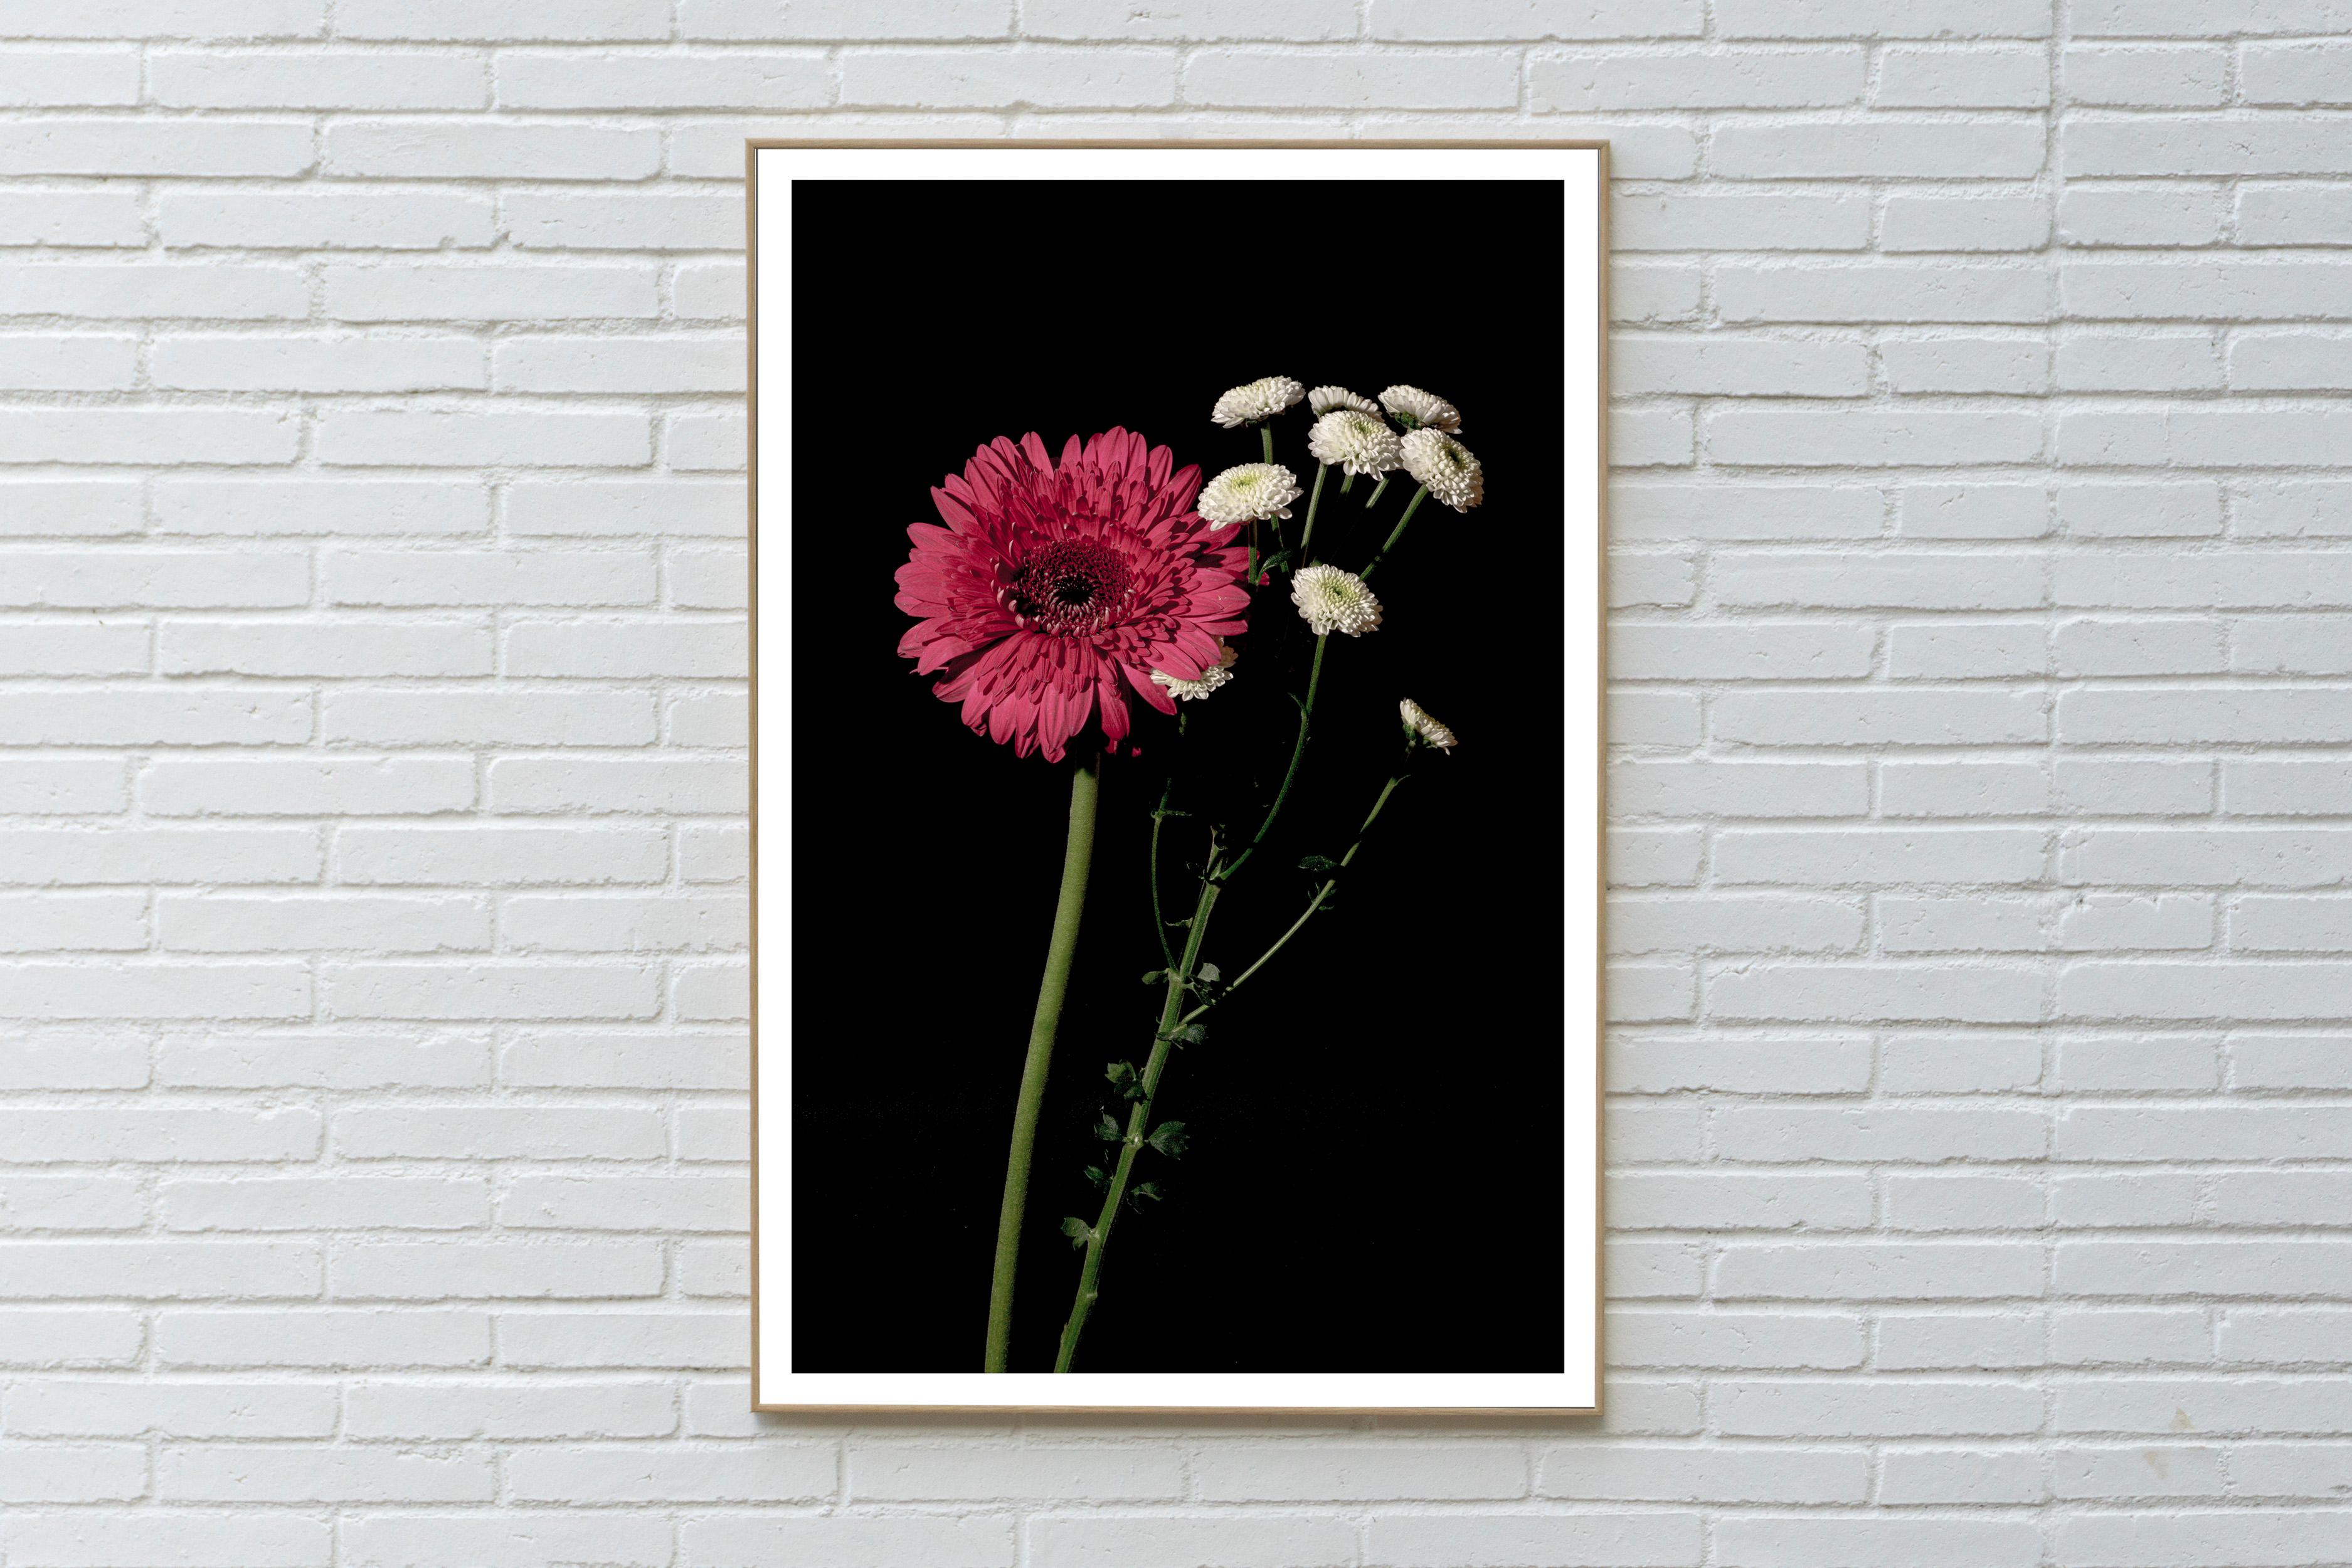 This is an exclusive limited edition color Giclée print, printed on matte photographic paper.

This exquisite still life photo, shows a classy bouquet beautifully lit with soft light.

The print measures 36 x 24 inches total, with an image size of